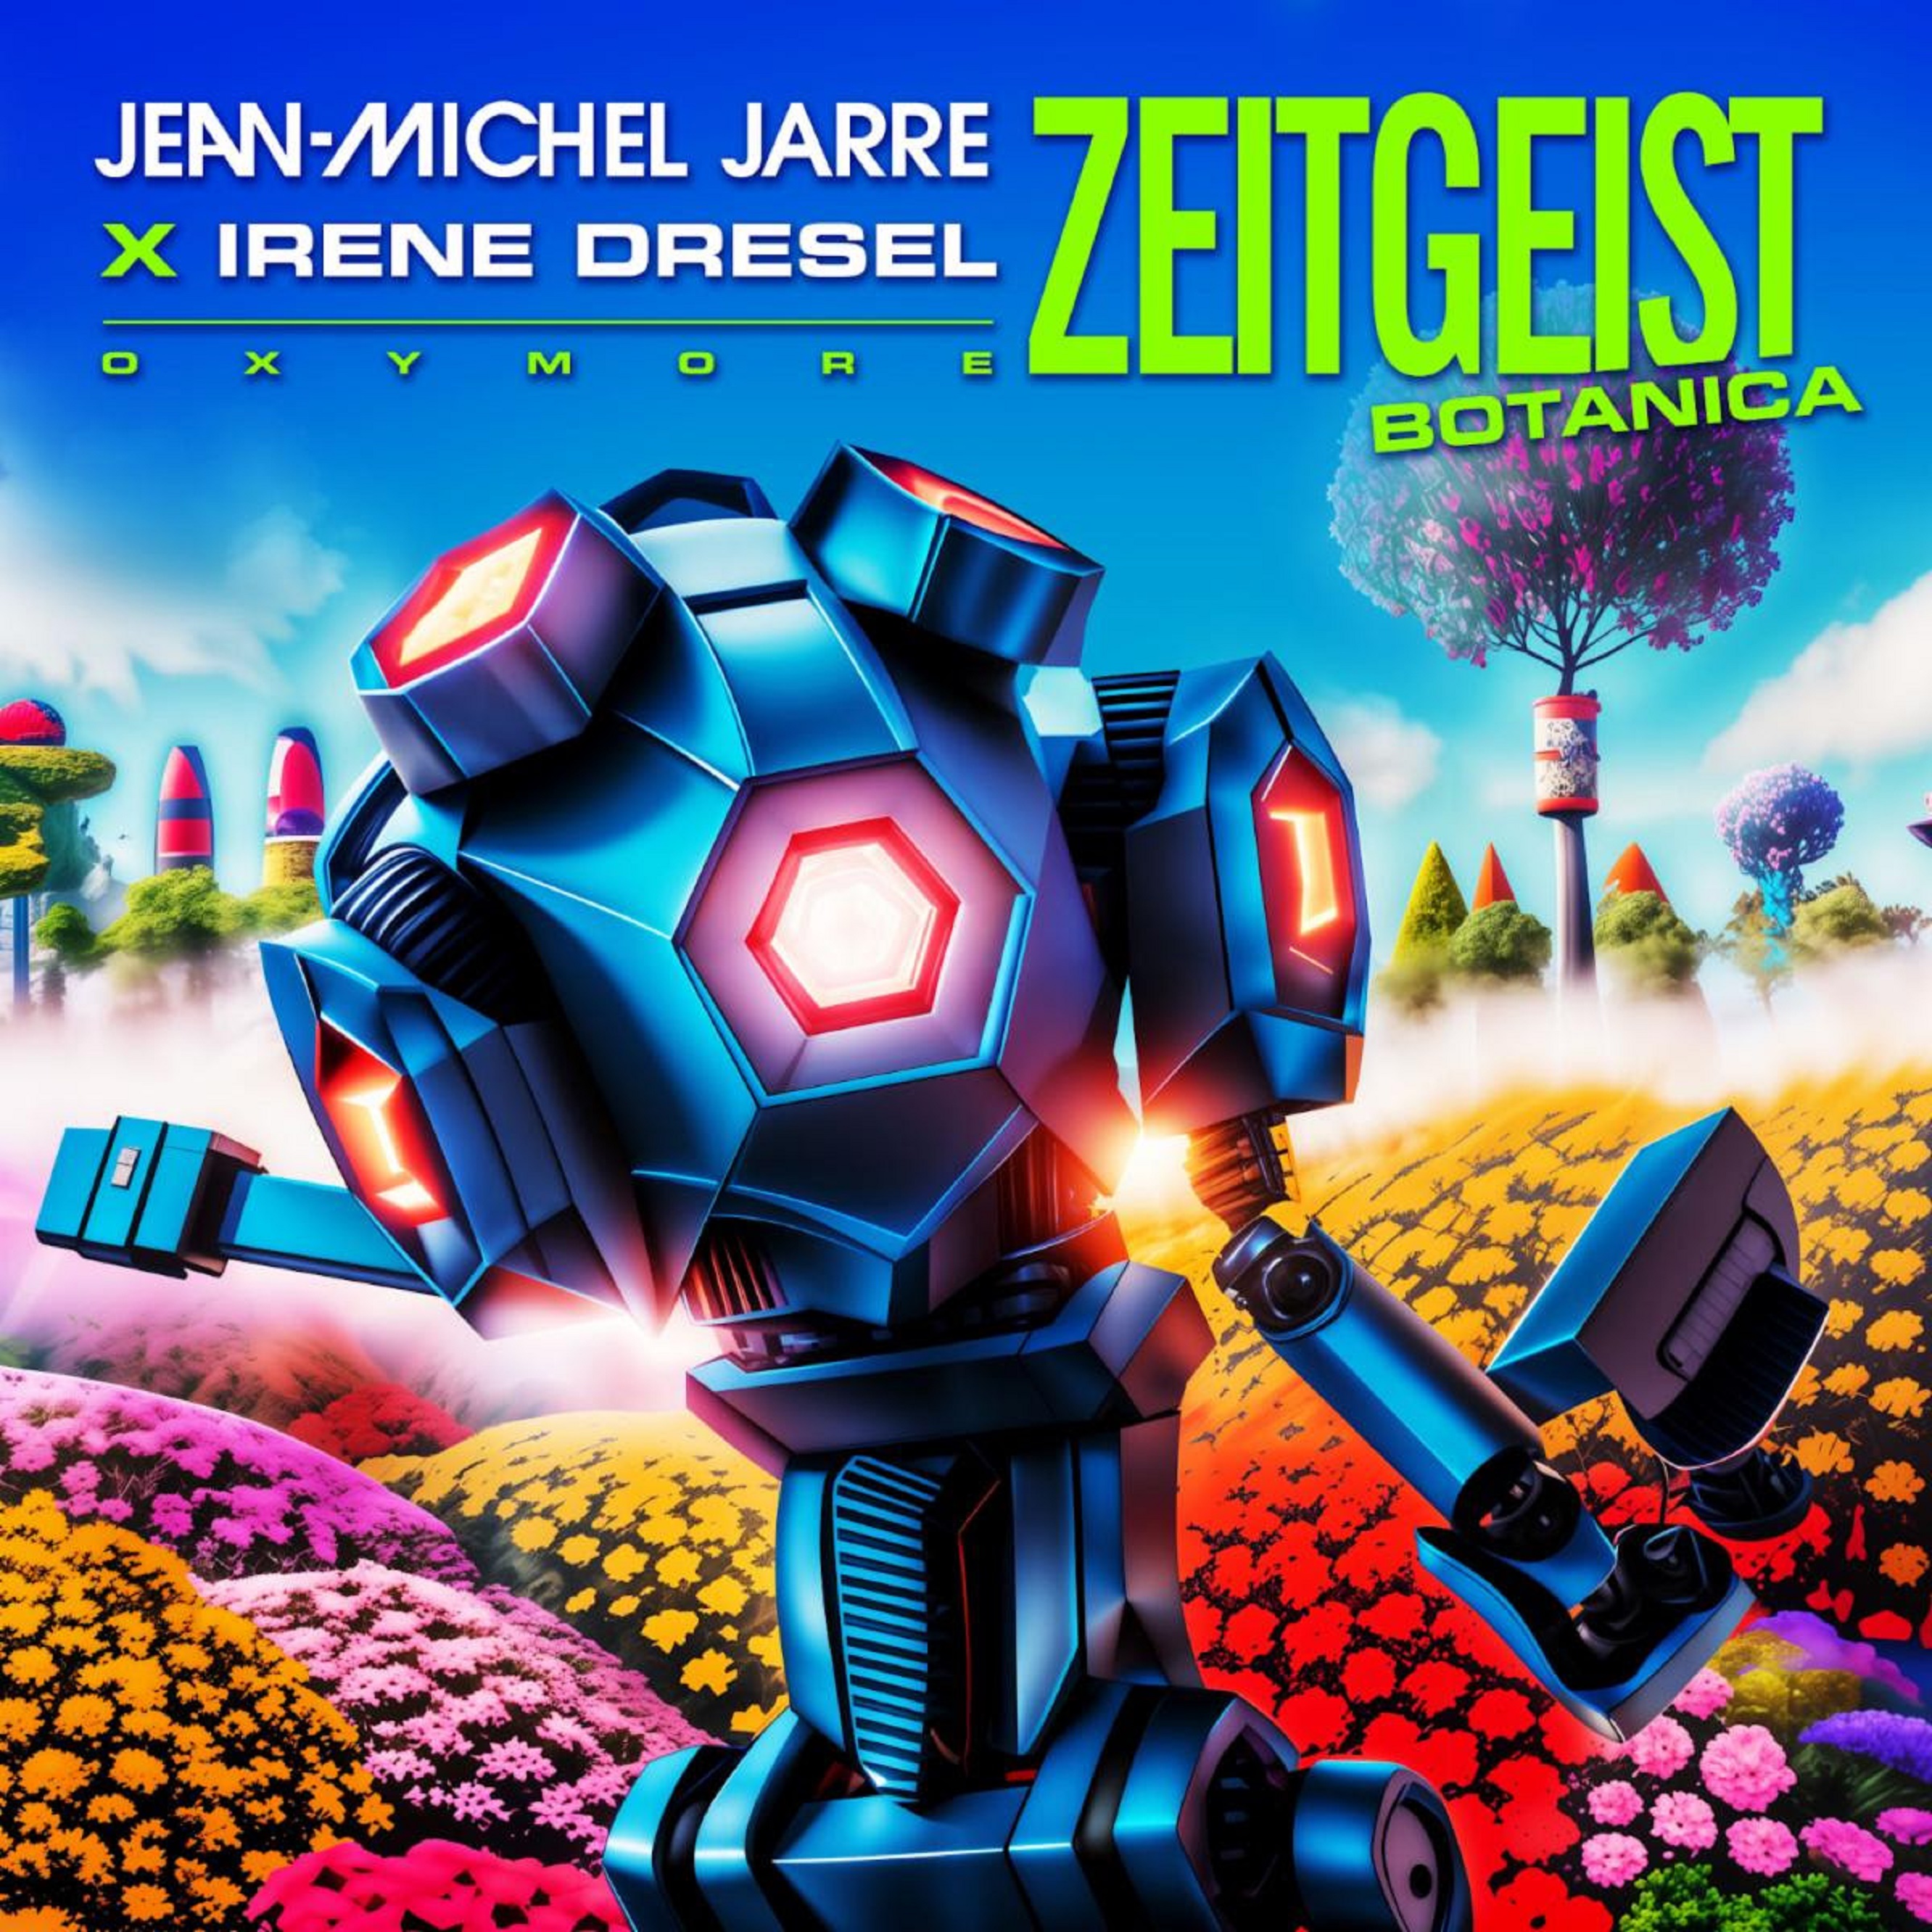 JEAN-MICHEL JARRE Announces 'OXYMOREWORKS' Album Out November 3, 2023 with New Track “Zeitgeist Botanica” with Irène Drésel Out Today